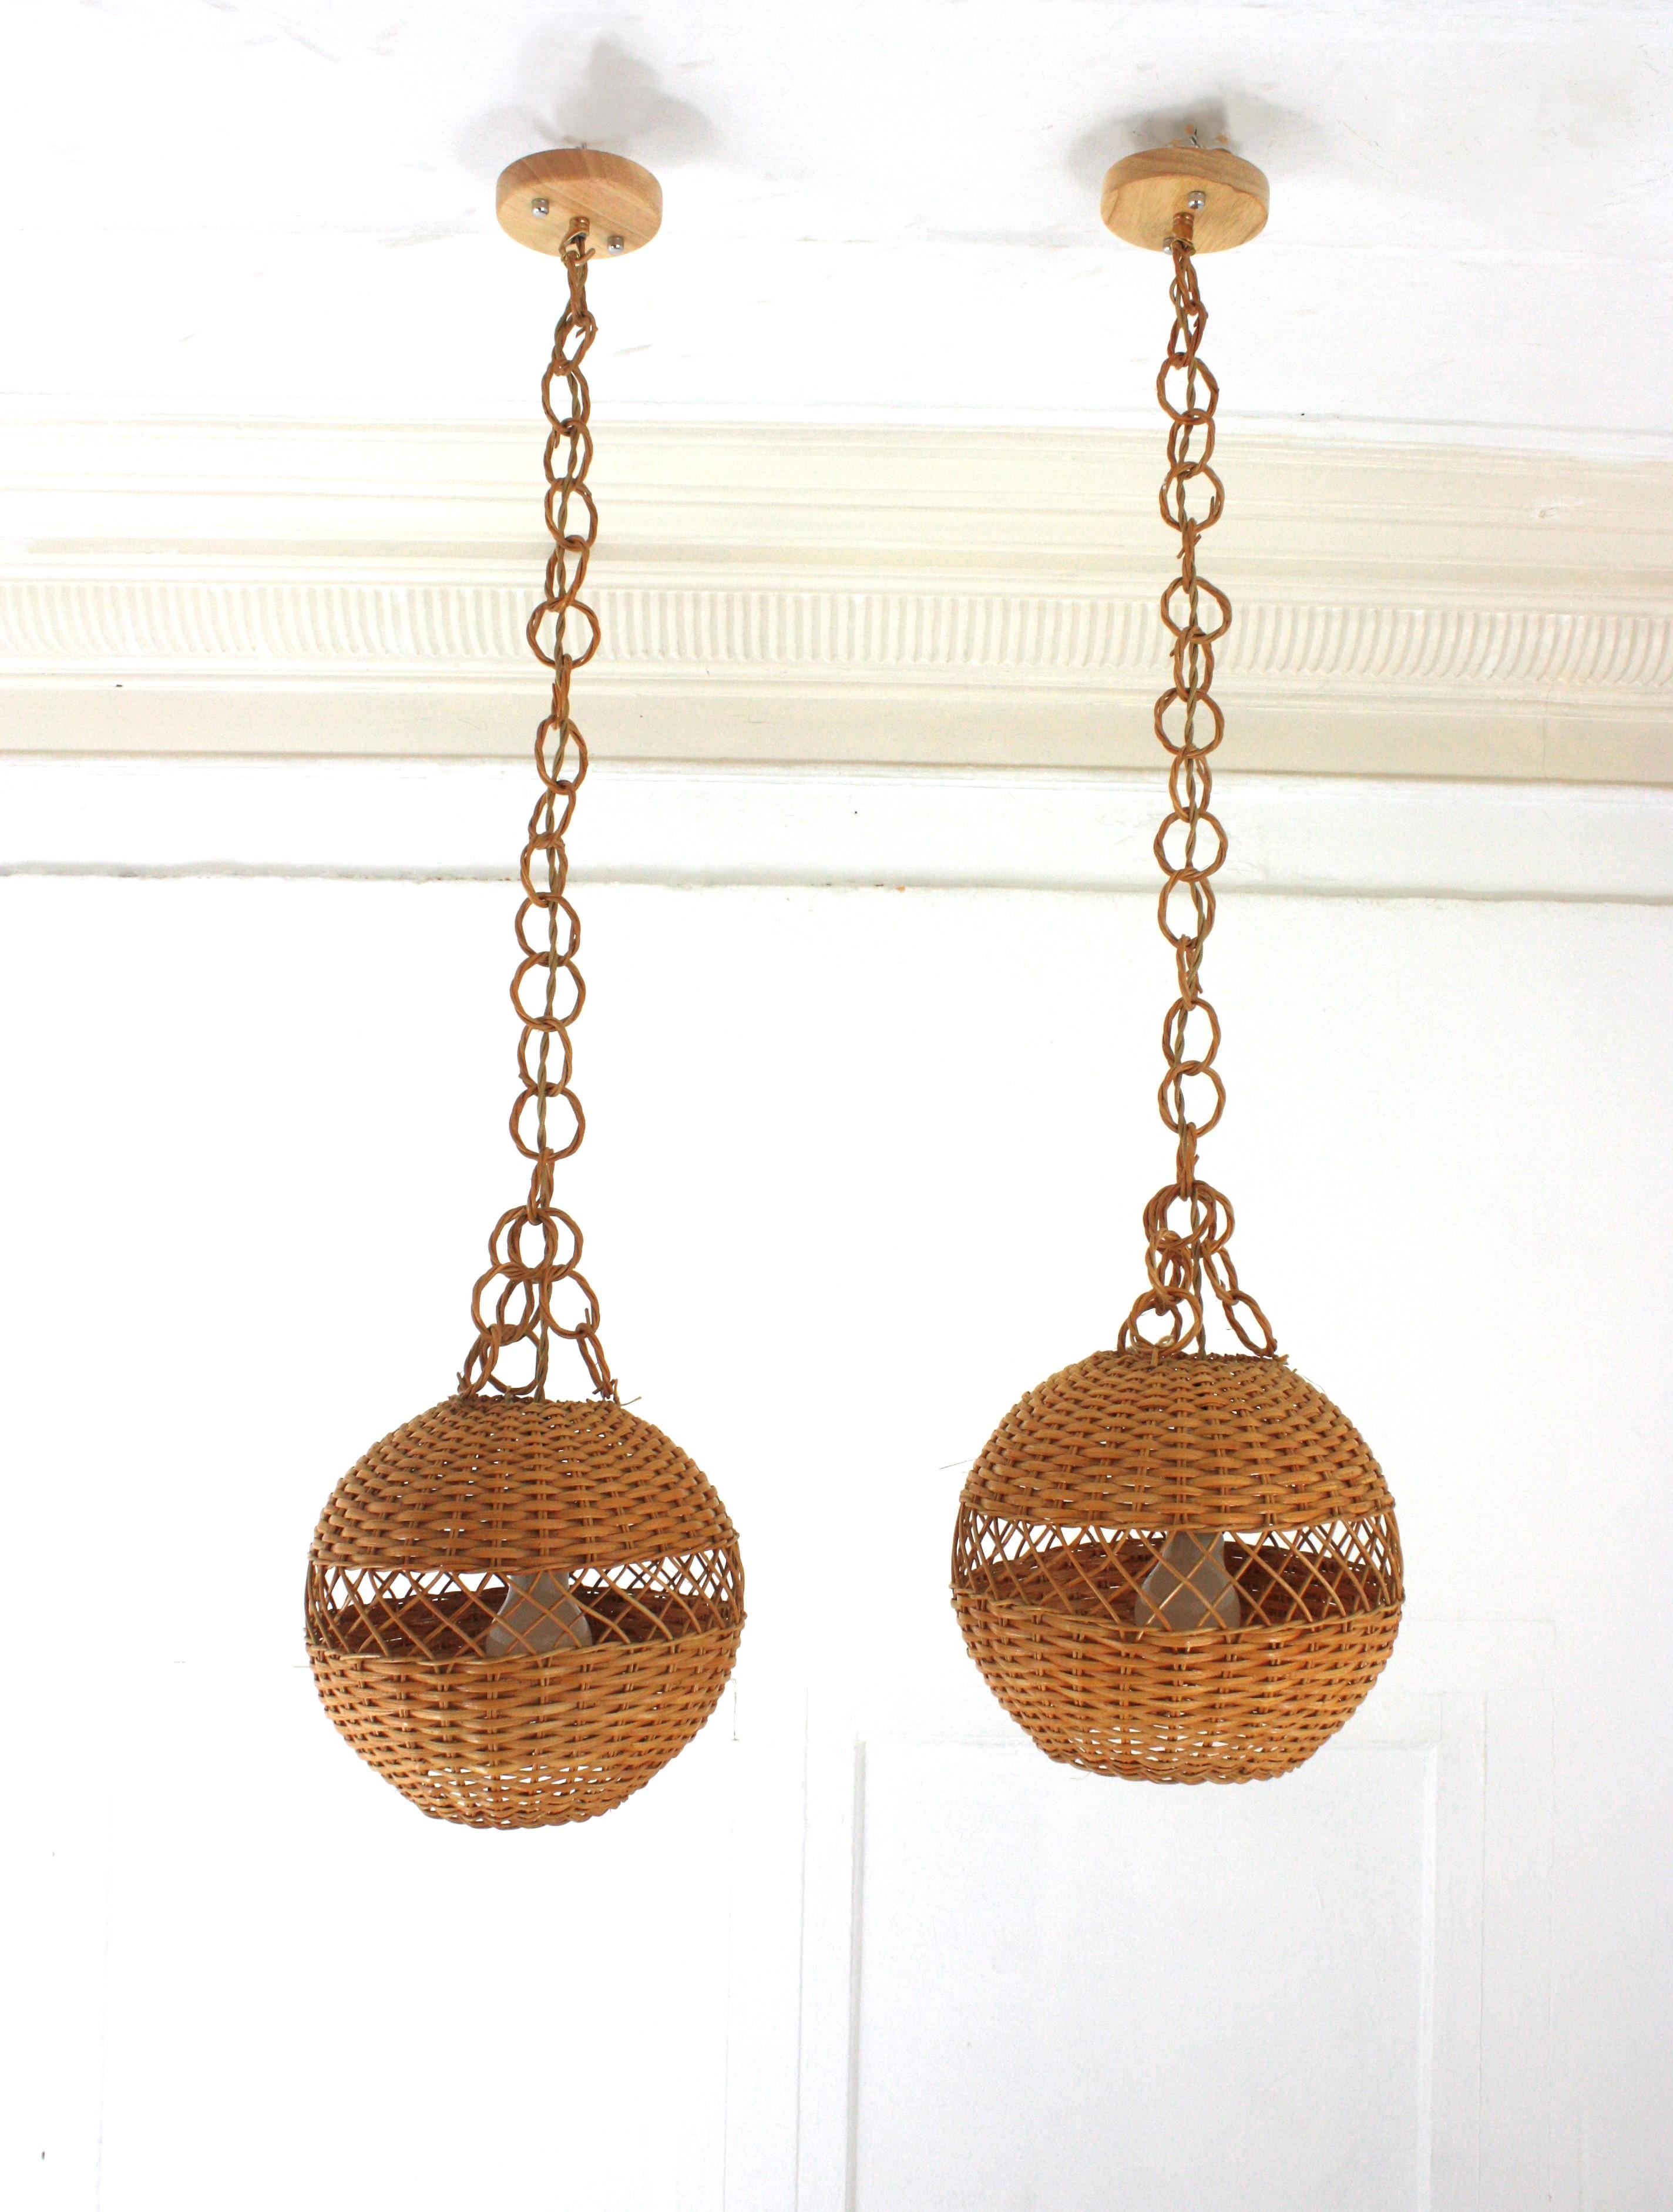 Pair of Handwoven Wicker Globe Pendant Lights or Lanterns For Sale 4